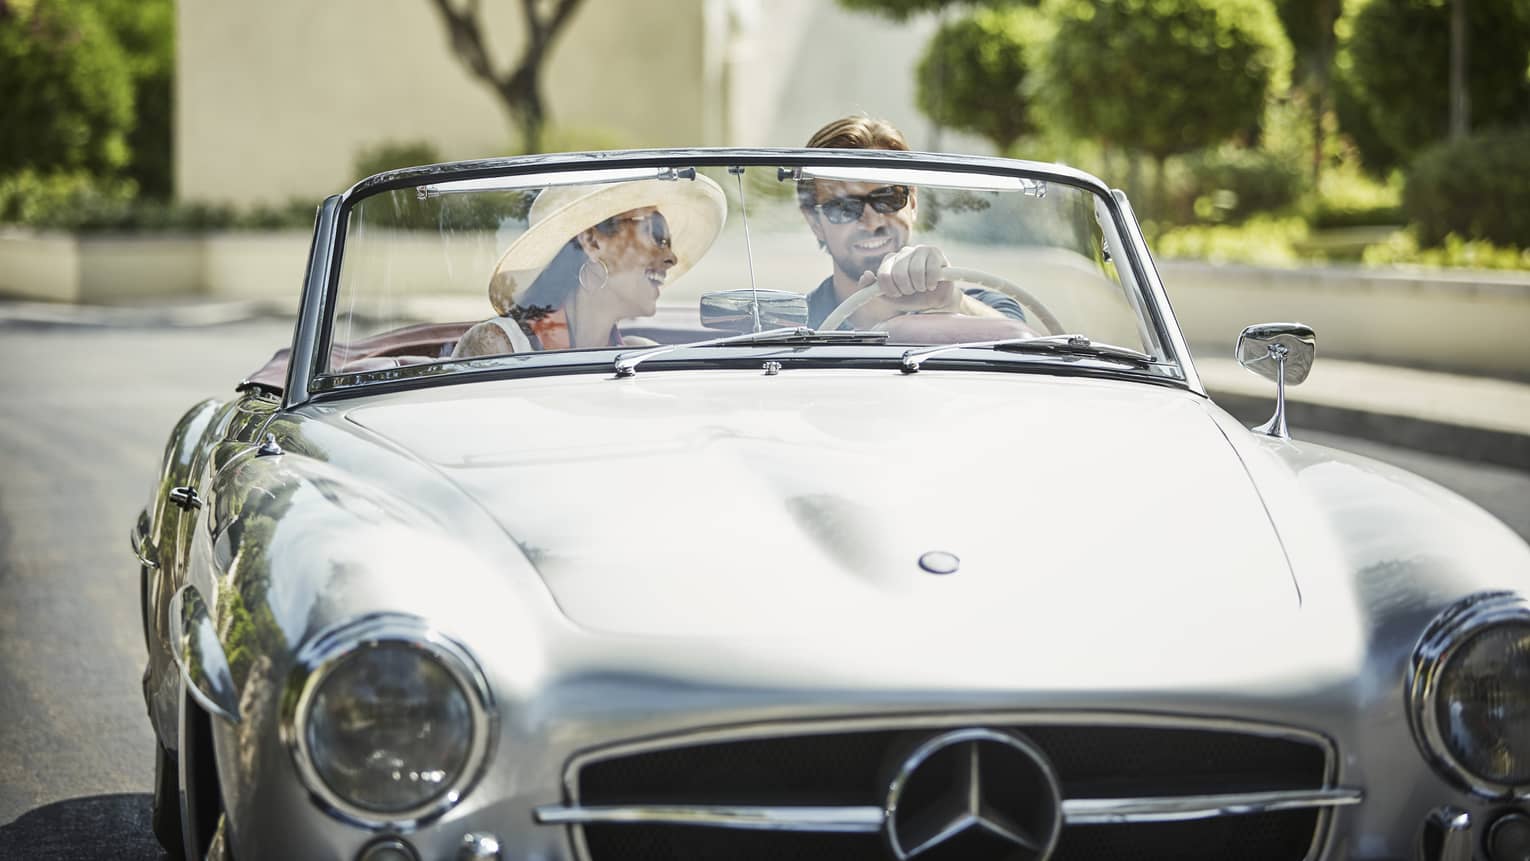 Smiling couple drive in silver luxury convertible car on sunny day